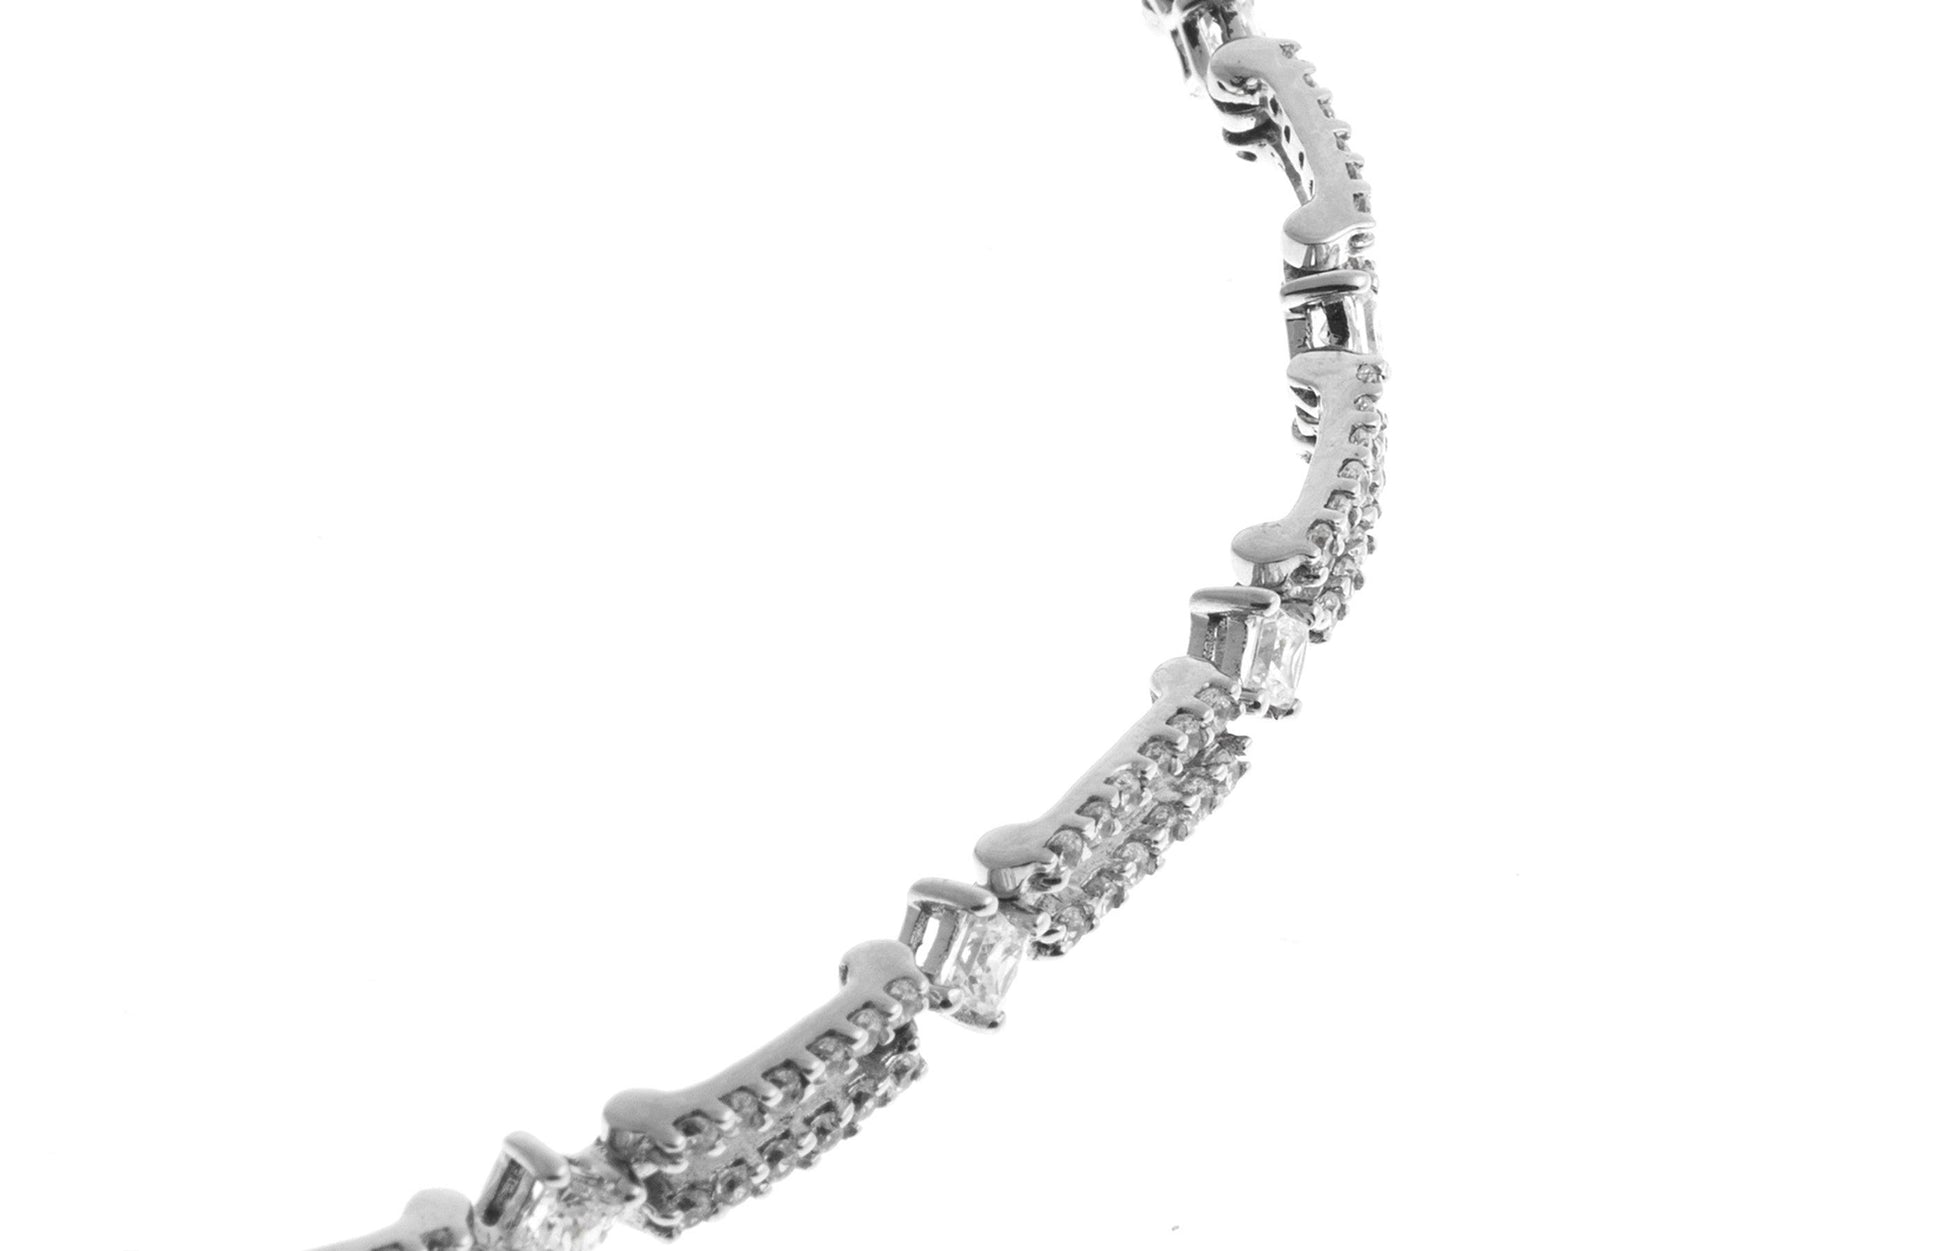 18ct White Gold Bracelet with Cubic Zirconia Stones (13.3g) LBR-1162 - Minar Jewellers